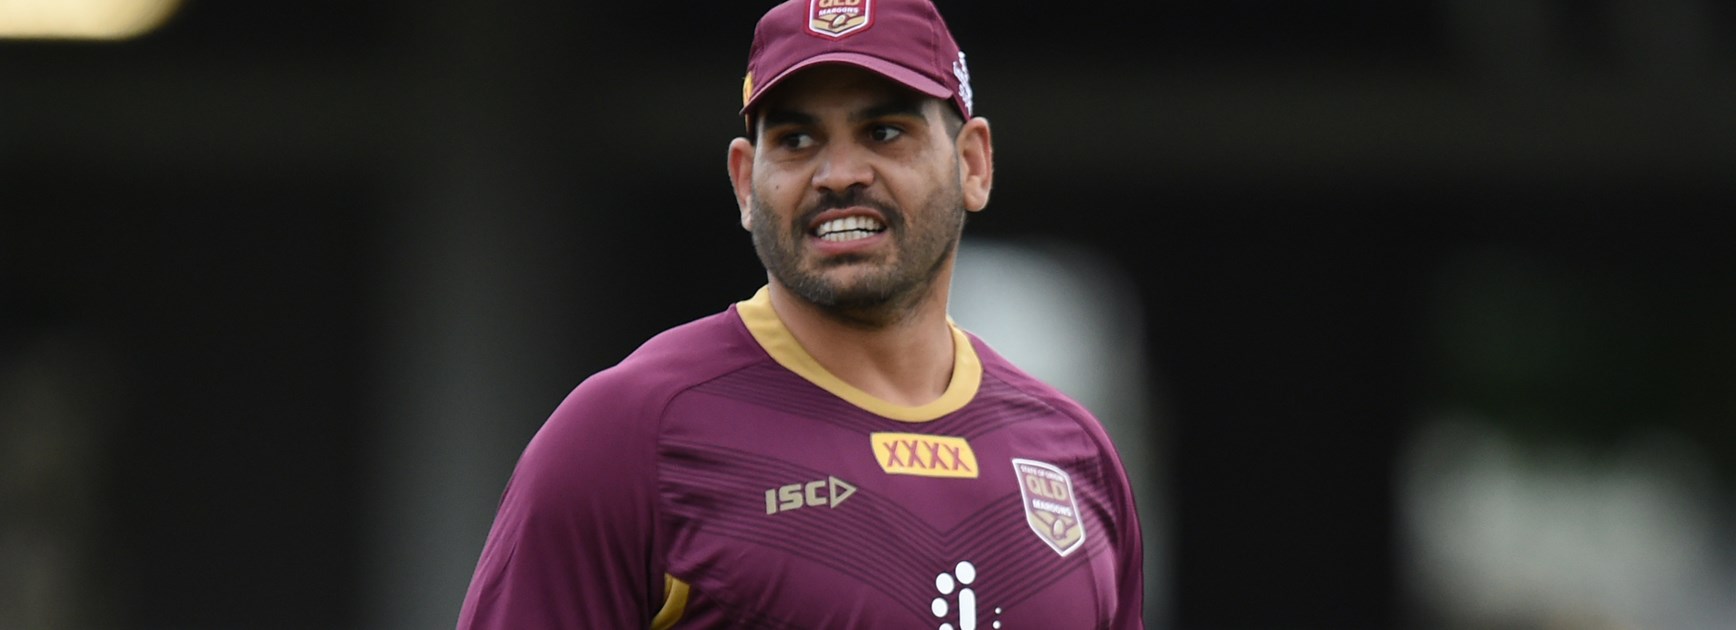 Inglis shed tears when given Maroons captaincy